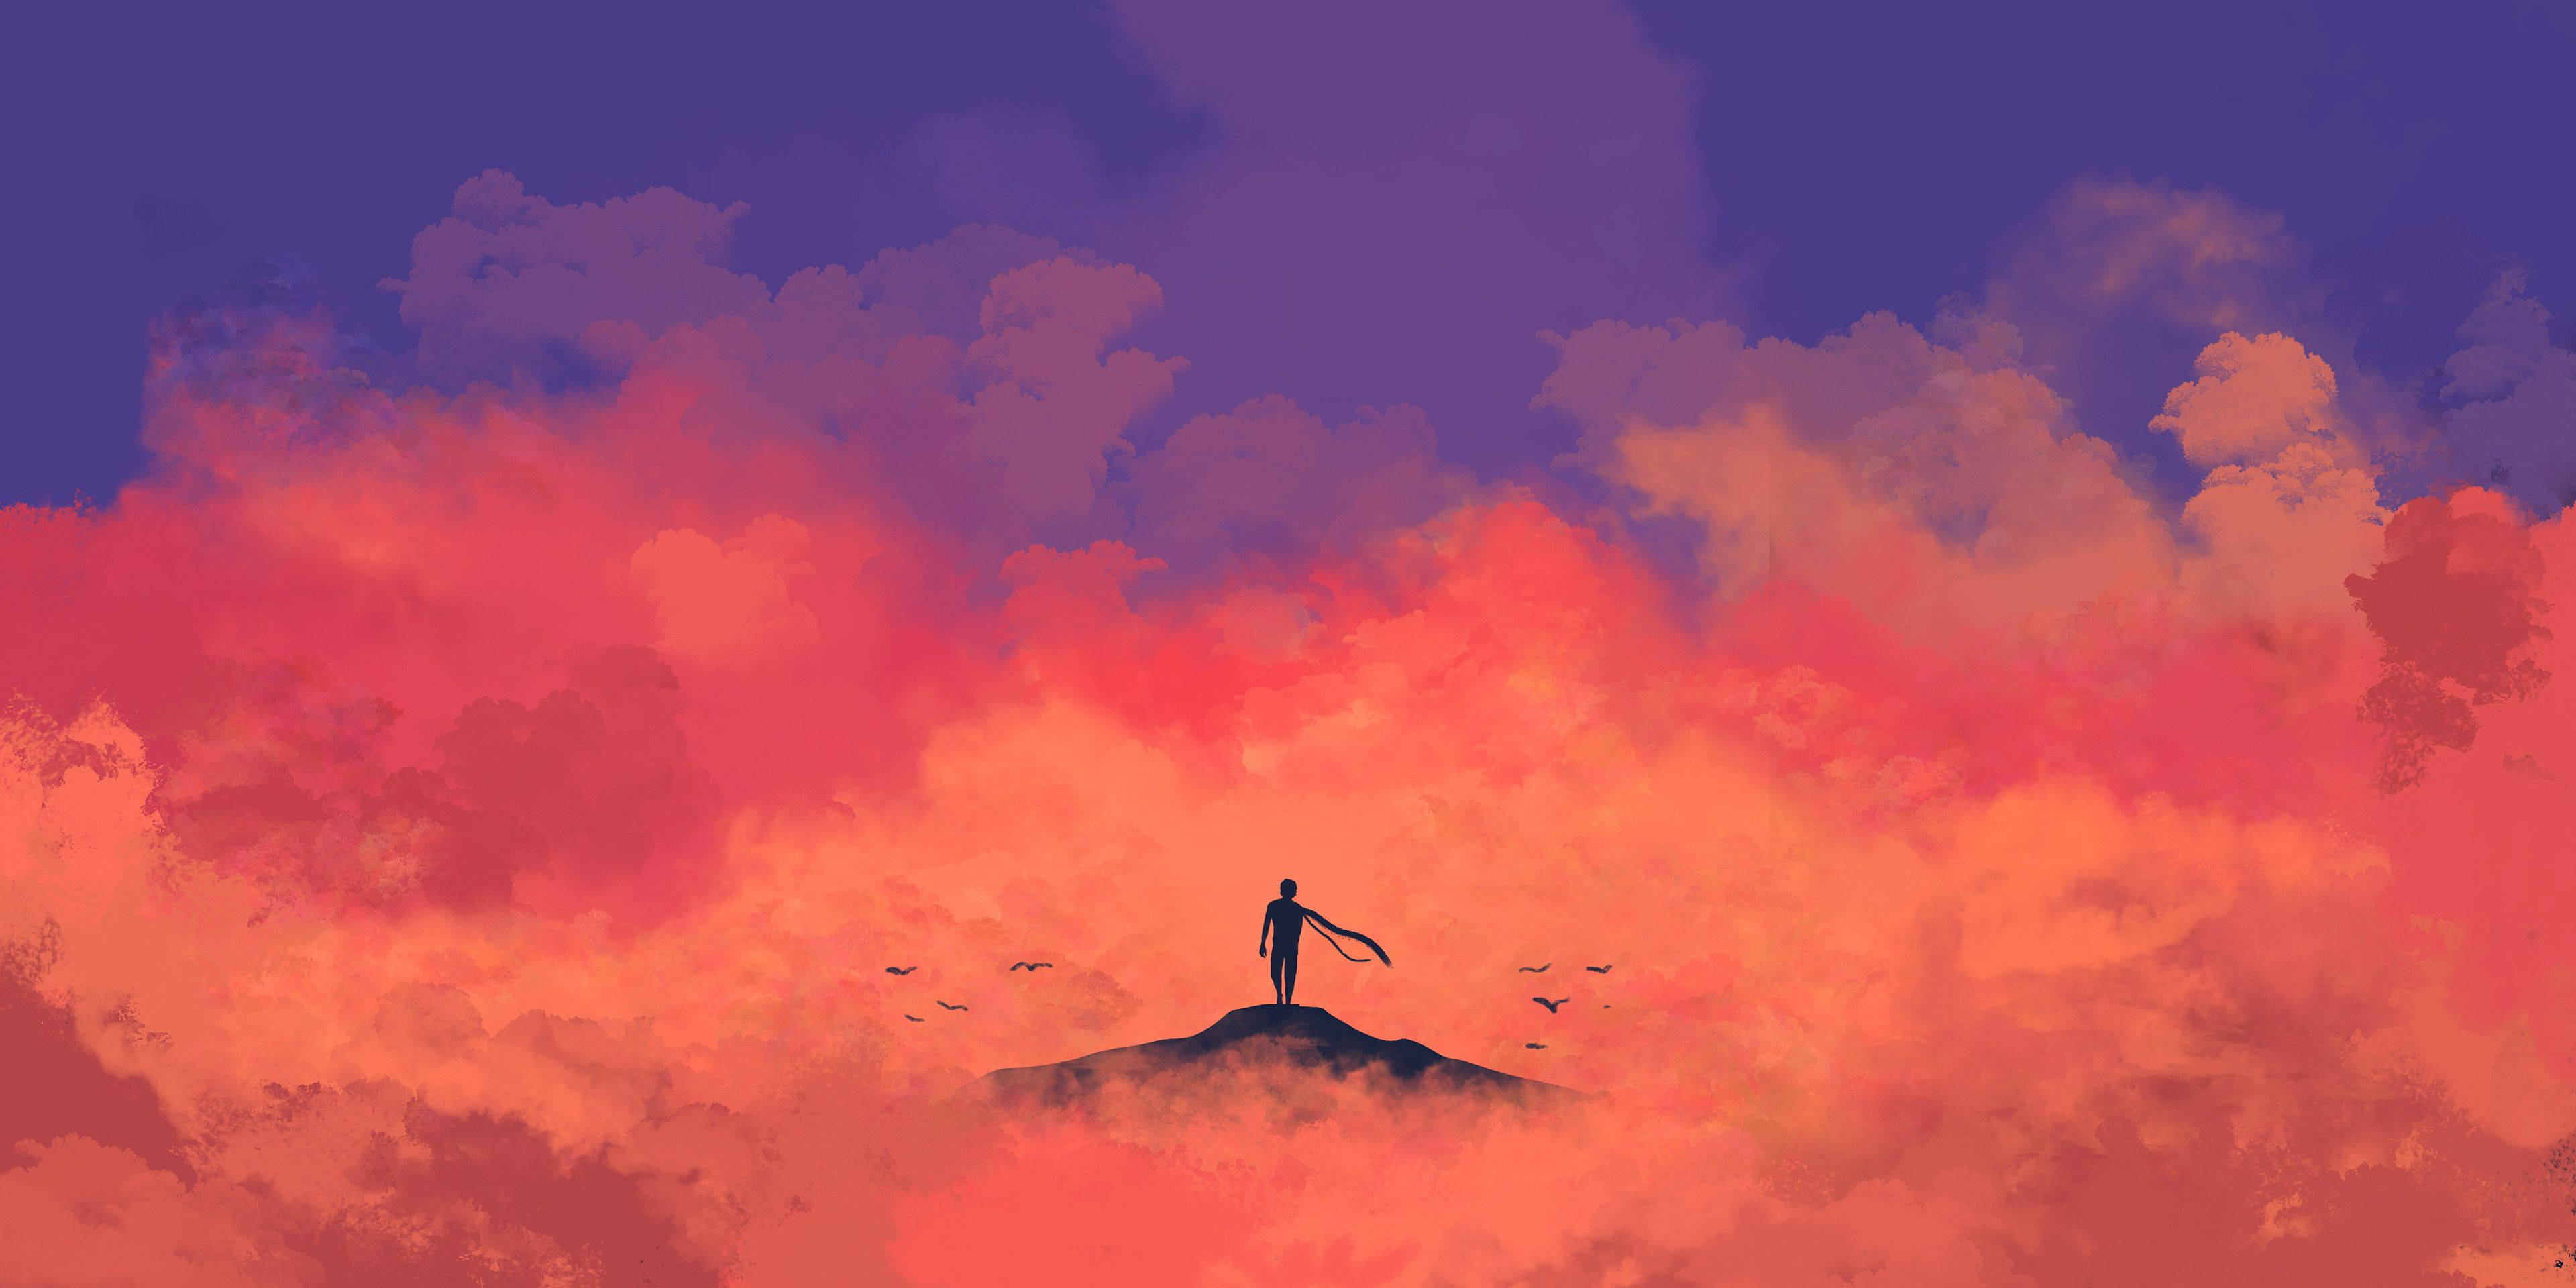 A person standing on a hill with a pink and blue sky - Chromebook